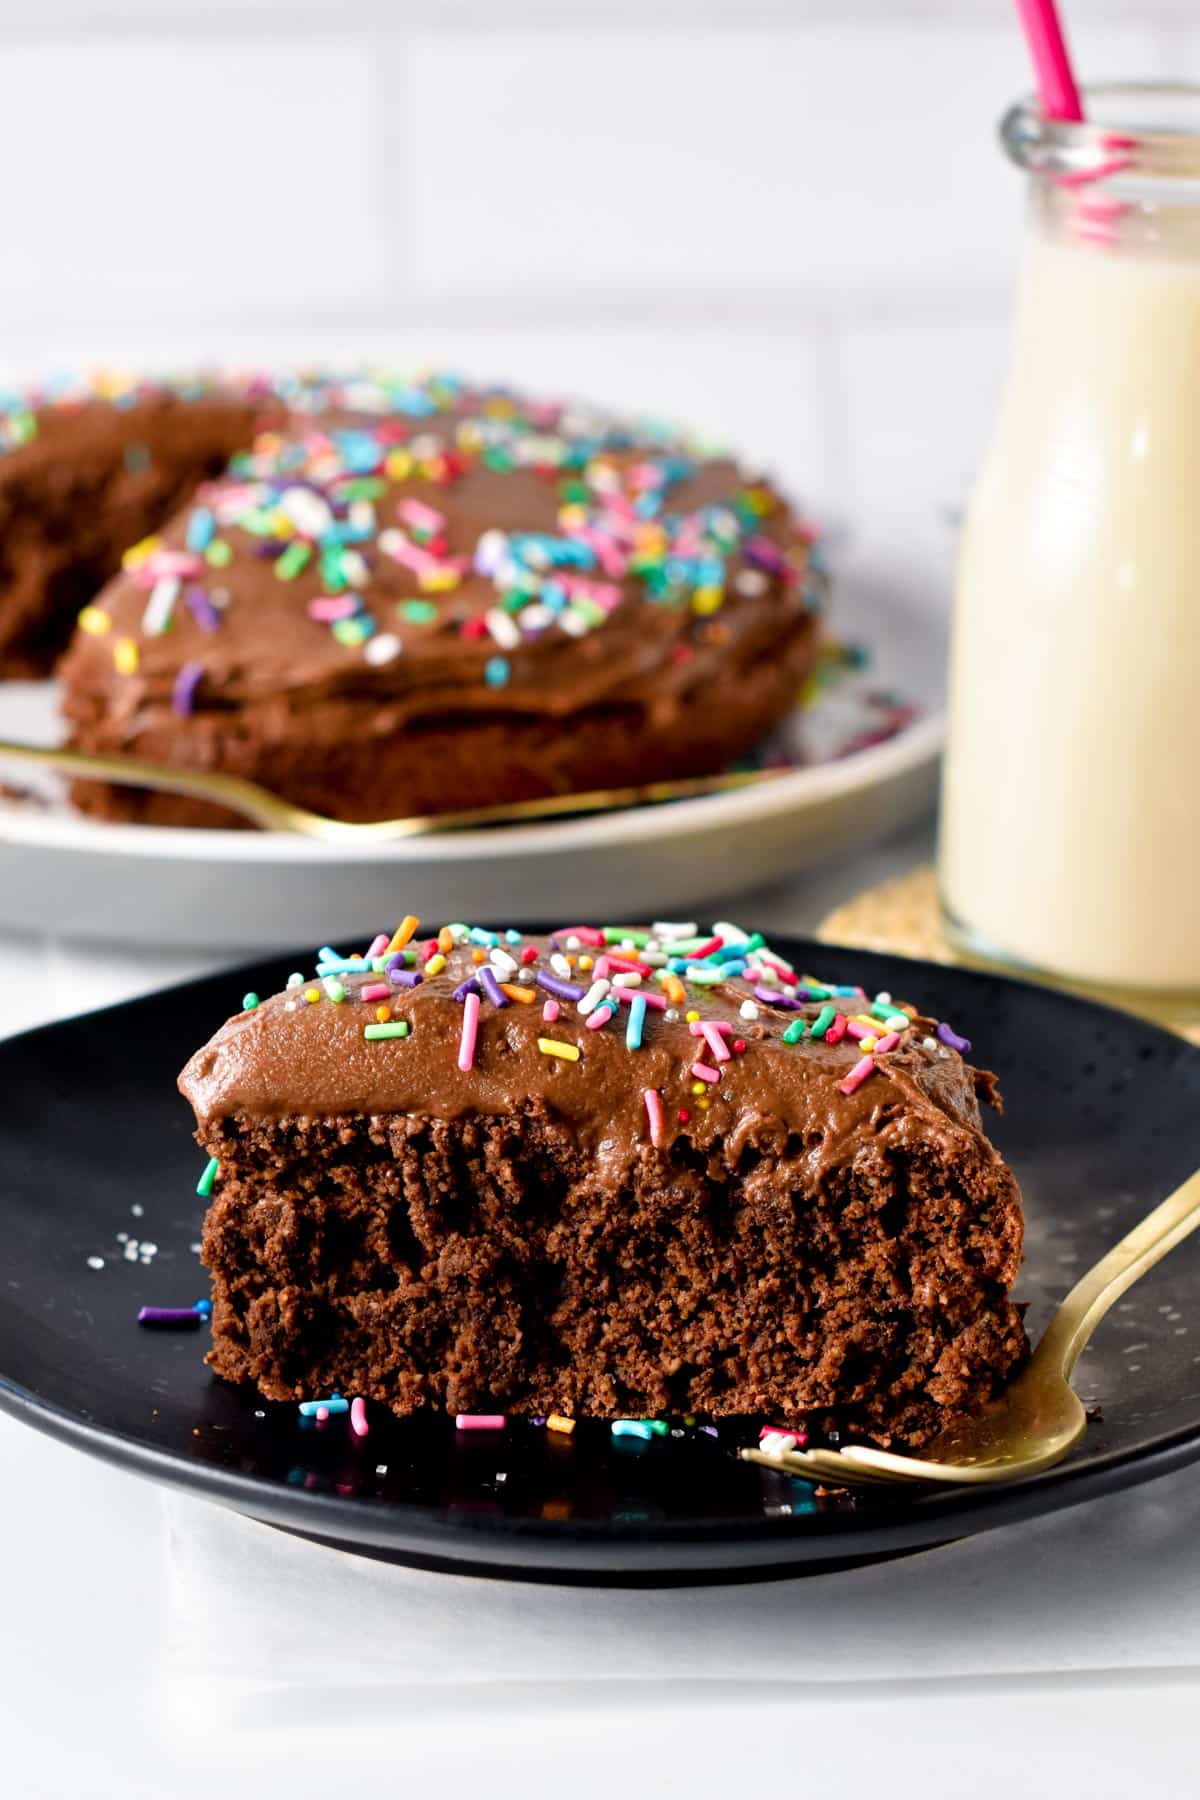 This Protein Cake recipe is a high-protein moist chocolate birthday cake perfect as a healthy celebration cake. It's packed with  15 grams of protein per serving and topped with the best creamy smooth chocolate protein frosting.This Protein Cake recipe is a high-protein moist chocolate birthday cake perfect as a healthy celebration cake. It's packed with  15 grams of protein per serving and topped with the best creamy smooth chocolate protein frosting.